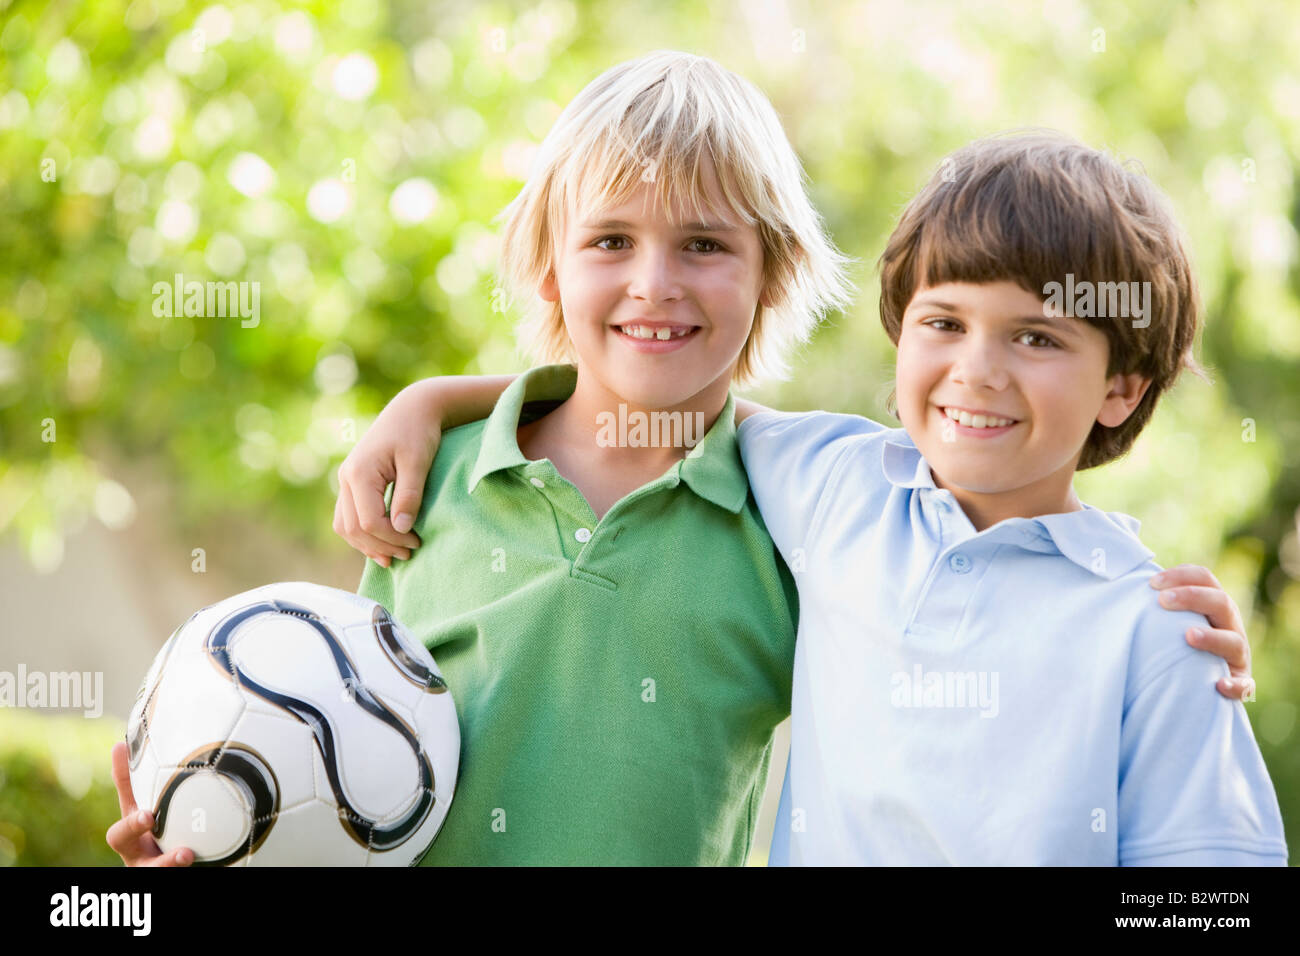 Two young boys outdoors with soccer ball smiling Stock Photo